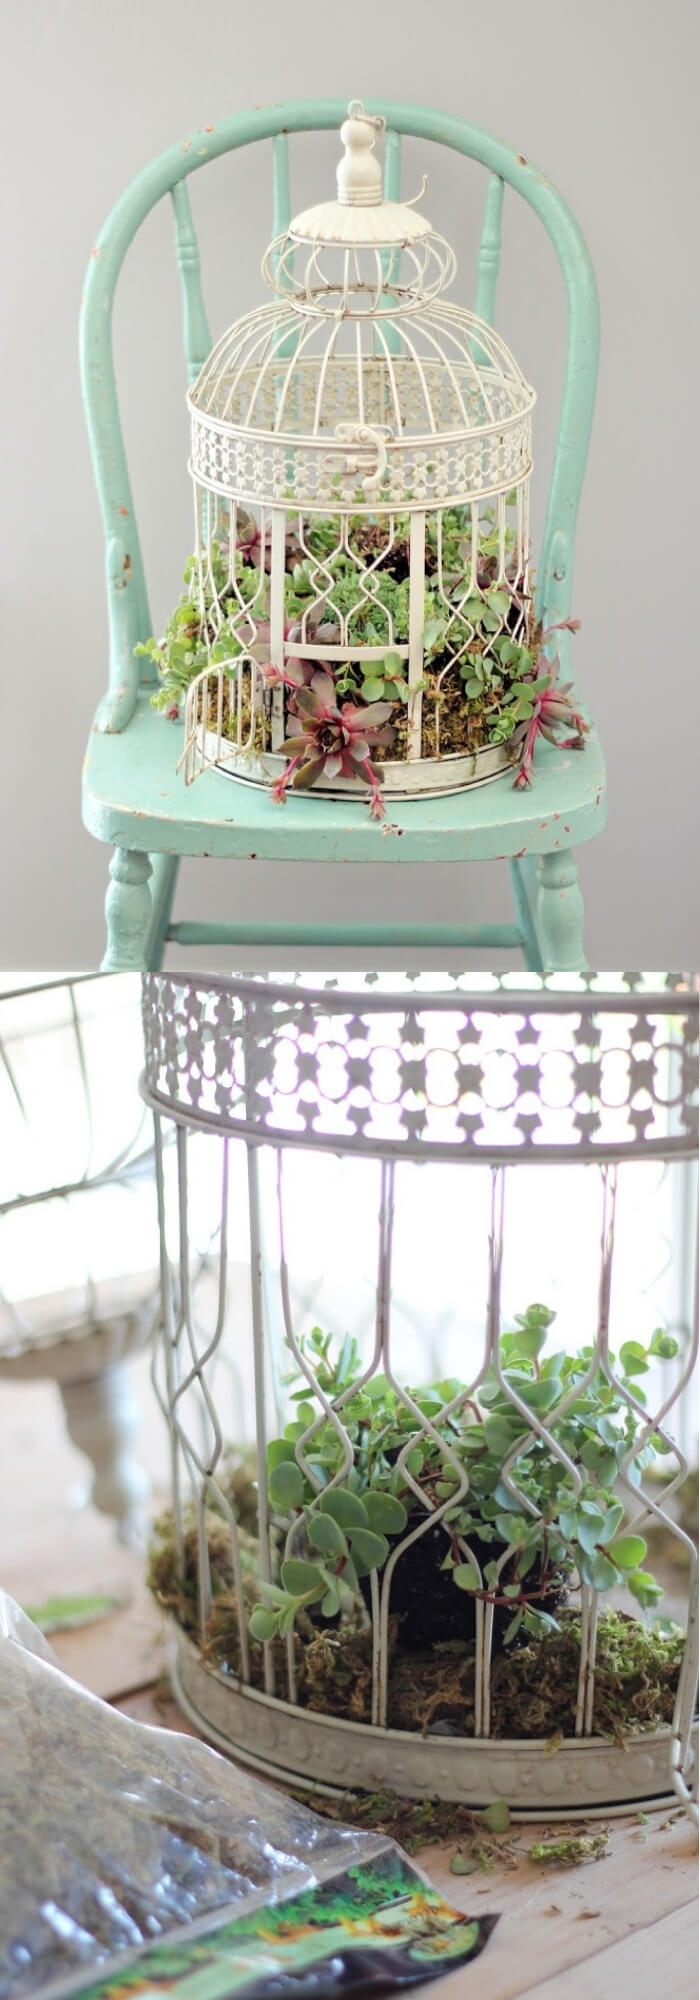 Plant succulents in a birdcage